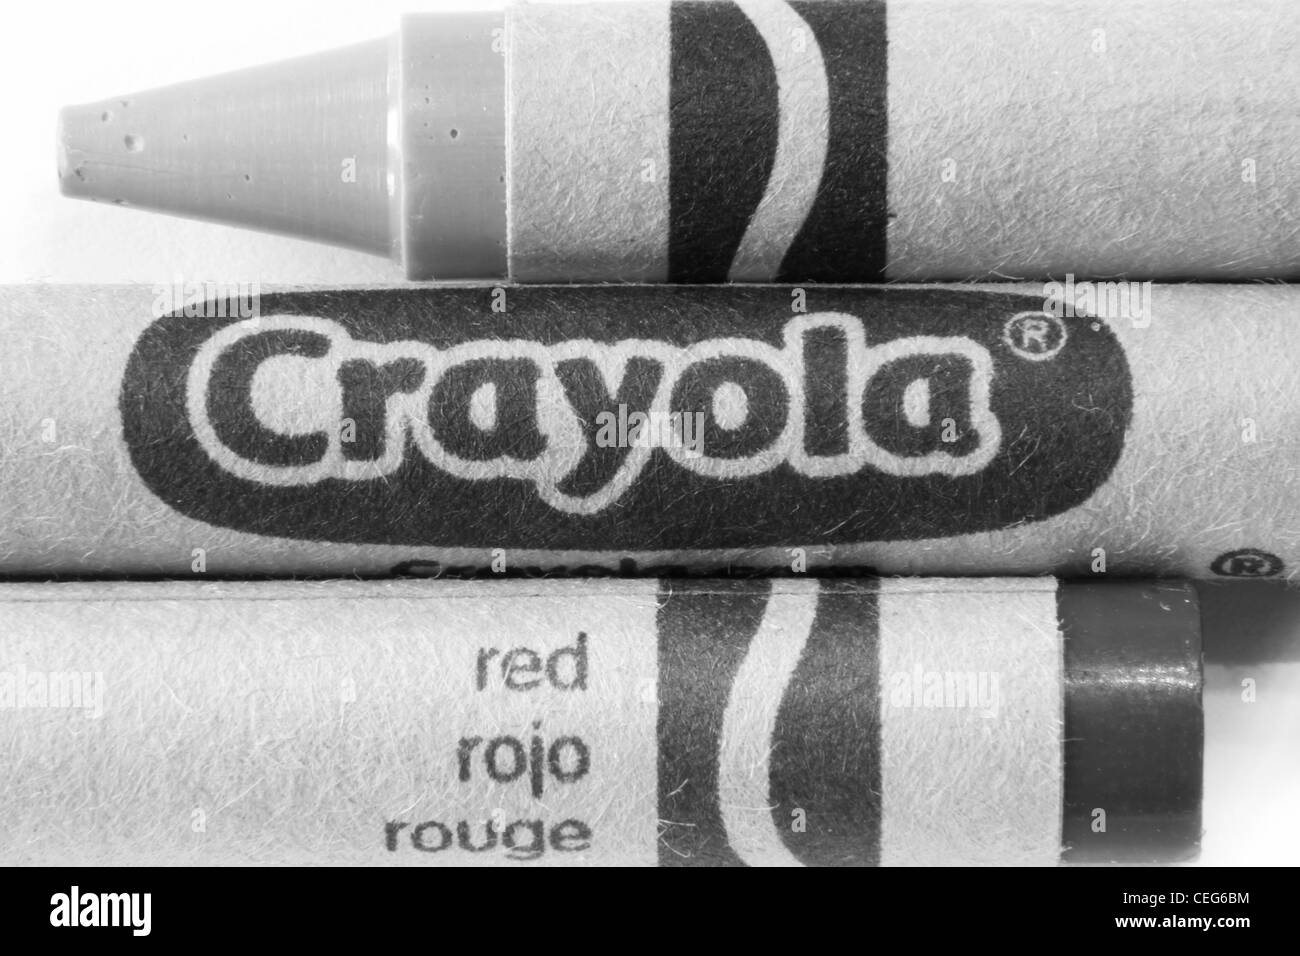 Red Crayon in Black and White. Crayola brand crayons. Macro close-up Stock  Photo - Alamy